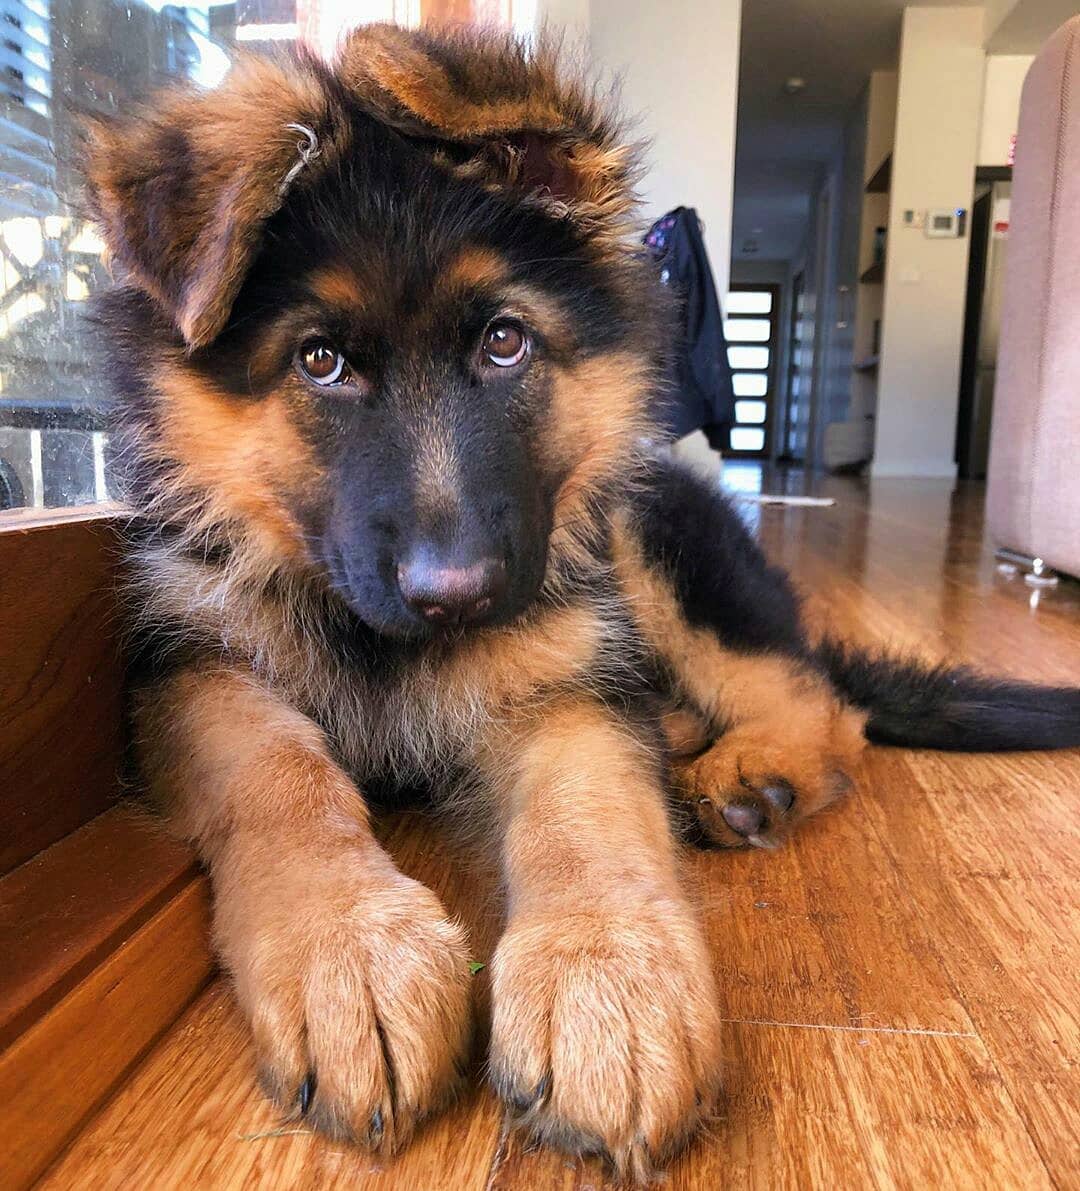 22 Pics Of German Shepherd Dogs To Put A Smile On Your ...